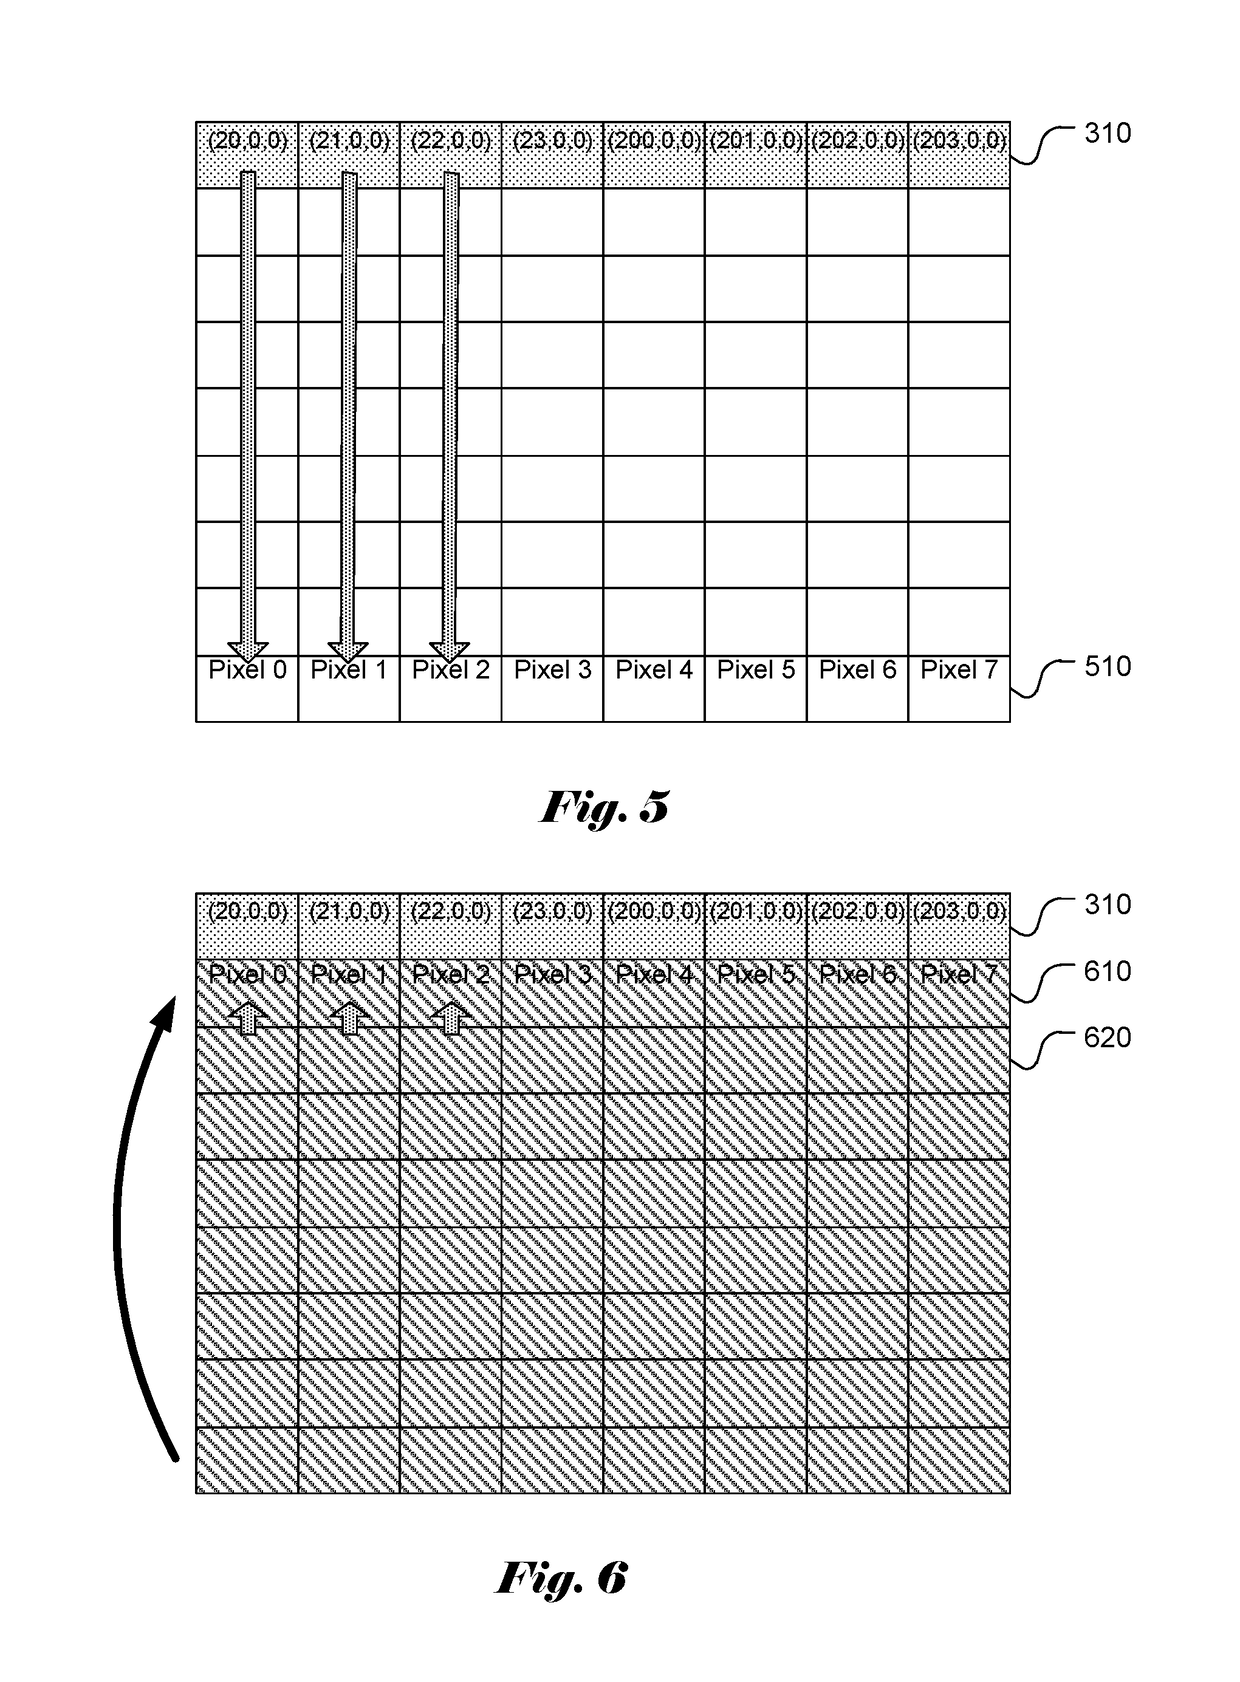 Method and apparatus for palette index coding in video and image compression